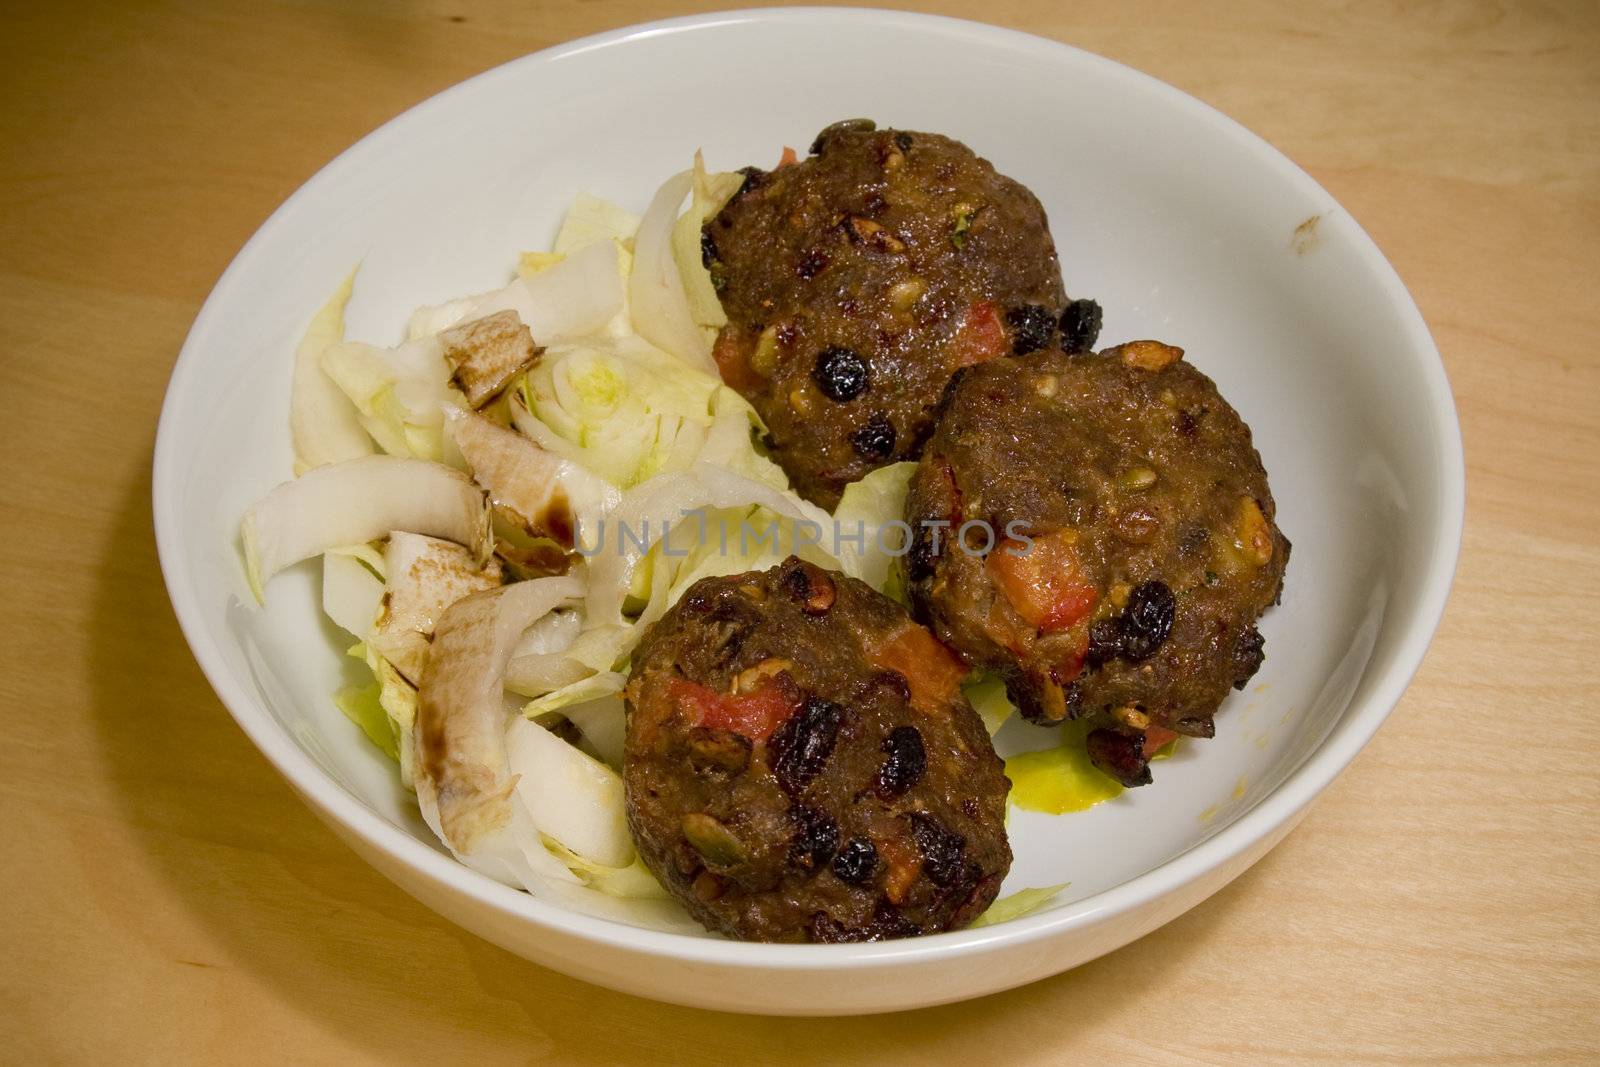 Meat balls on a bed of endives by cvail73